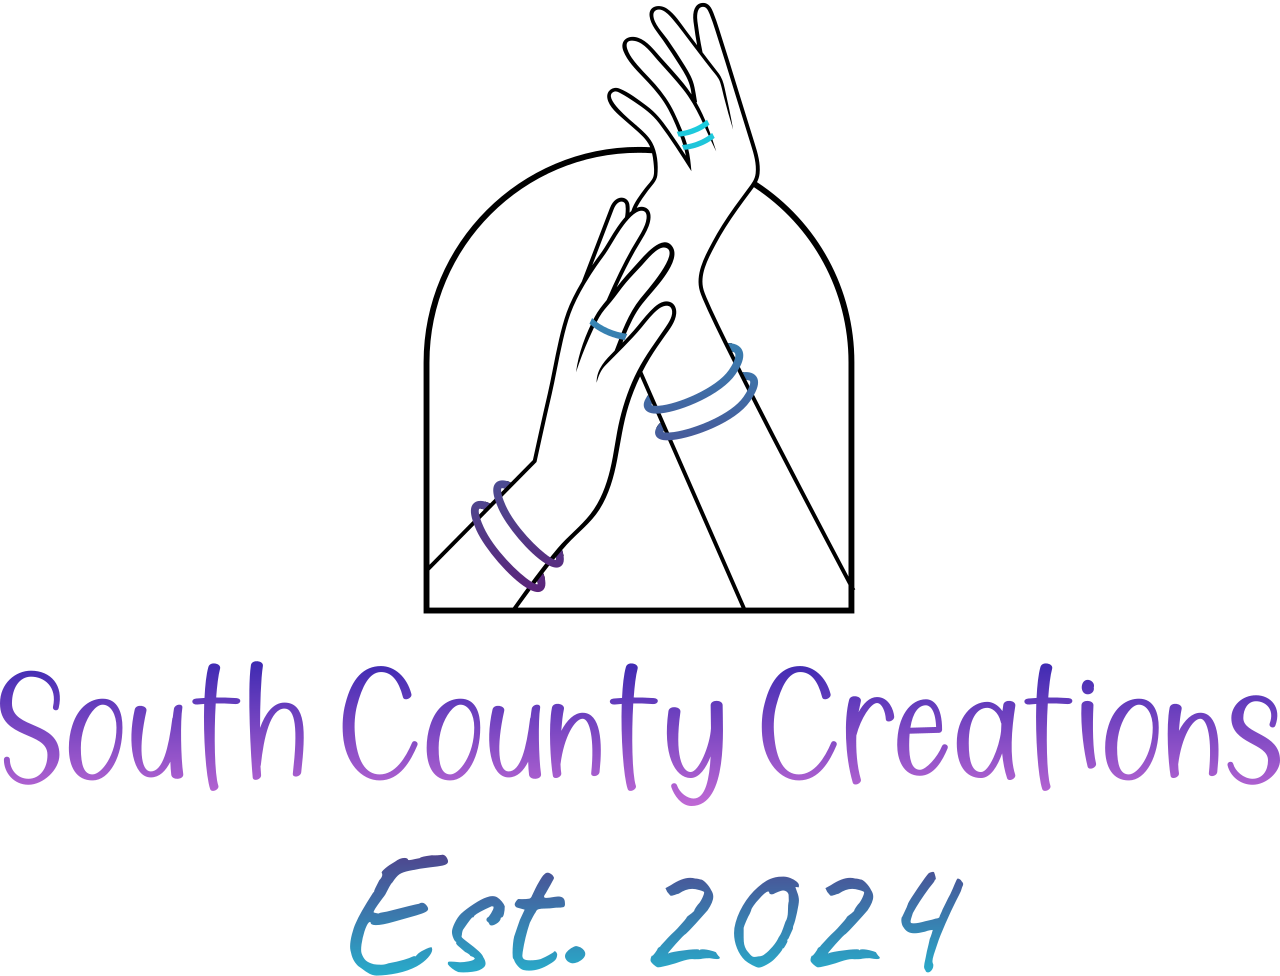 South County Creations's logo